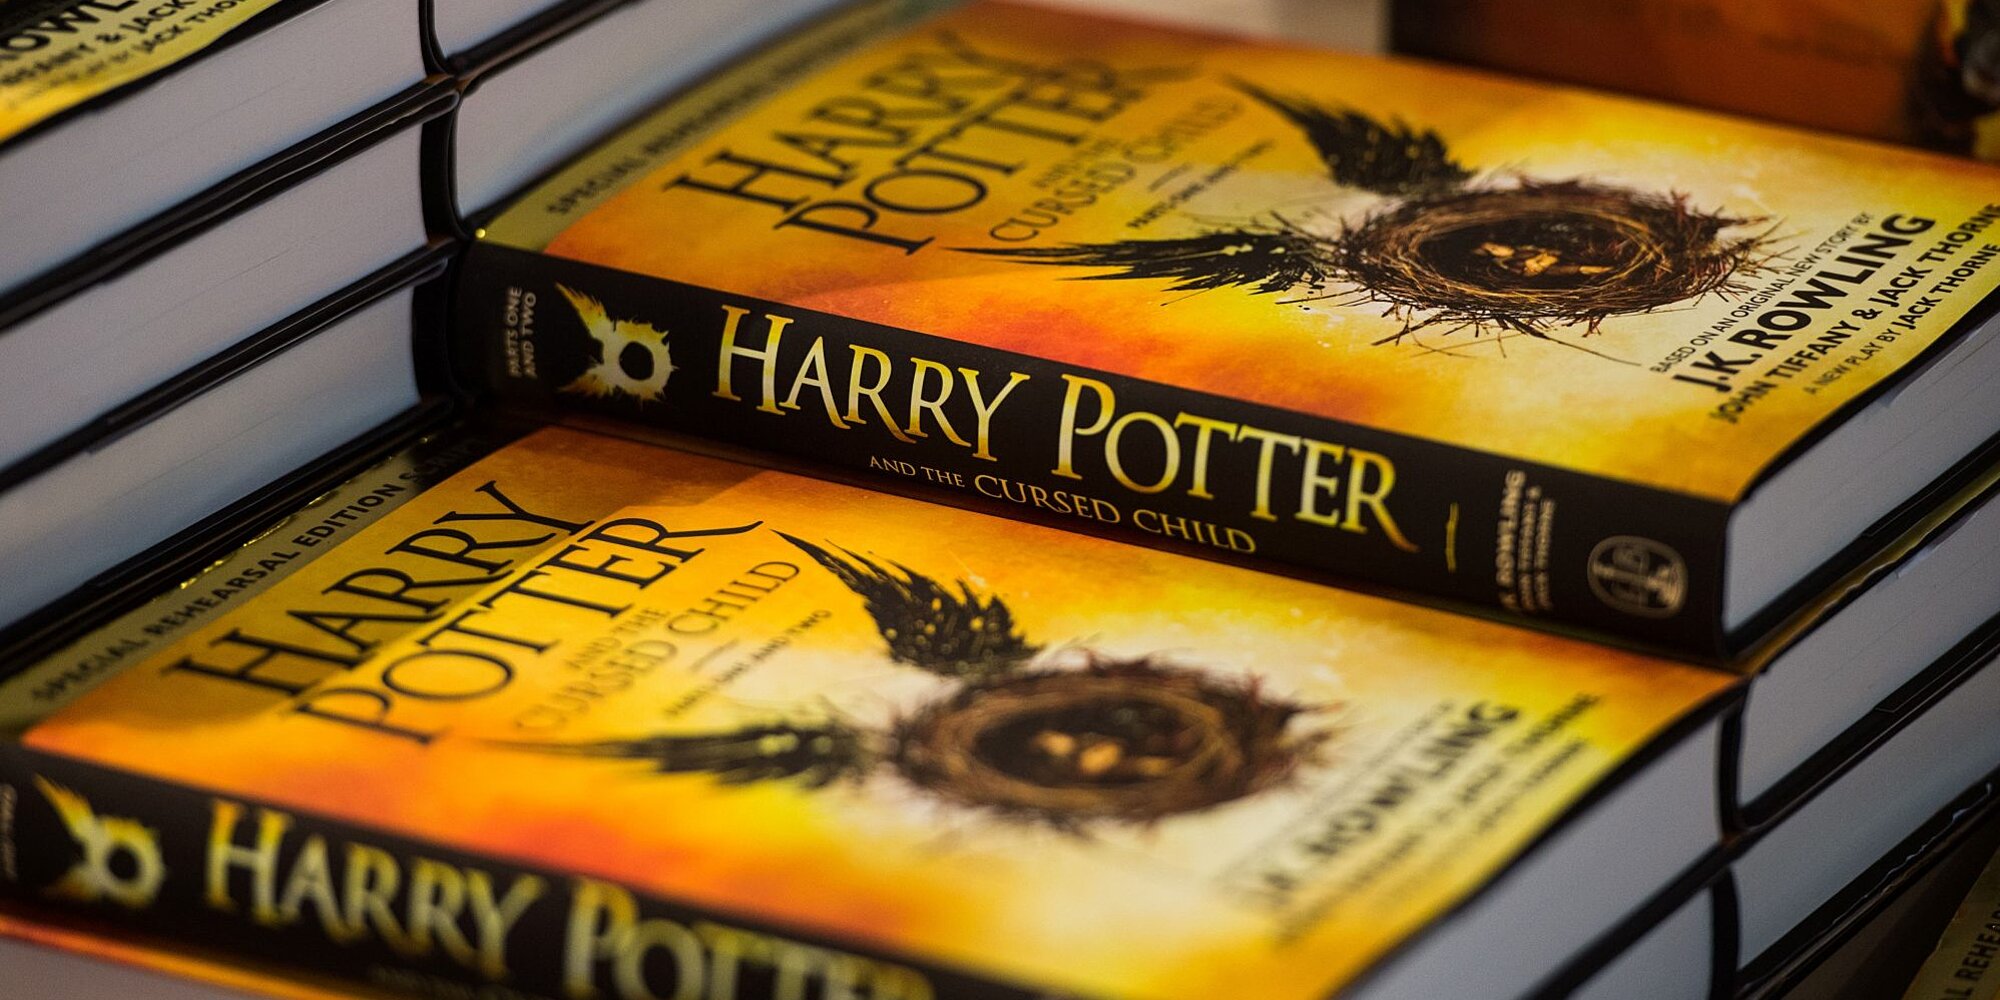 read harry potter and the cursed child book